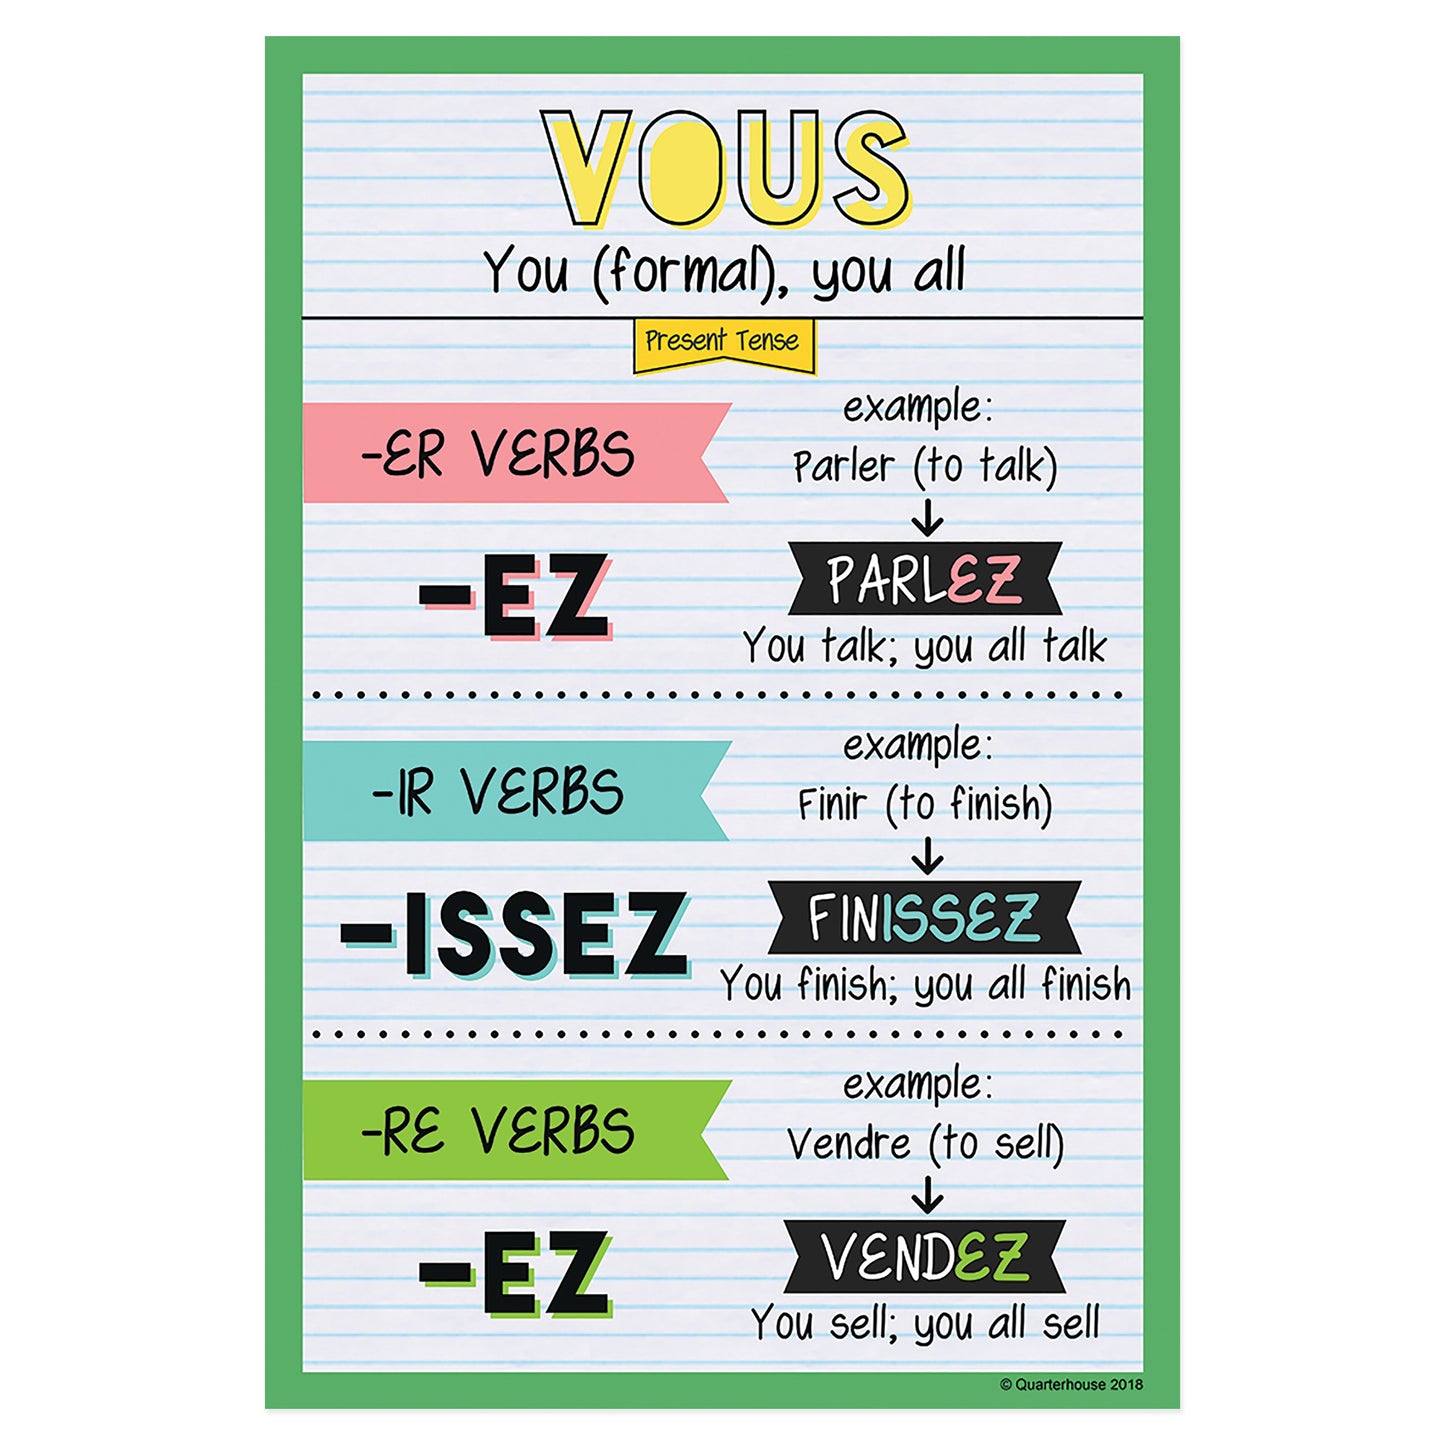 Quarterhouse Vous - Present Tense French Verb Conjugation Poster, French and ESL Classroom Materials for Teachers